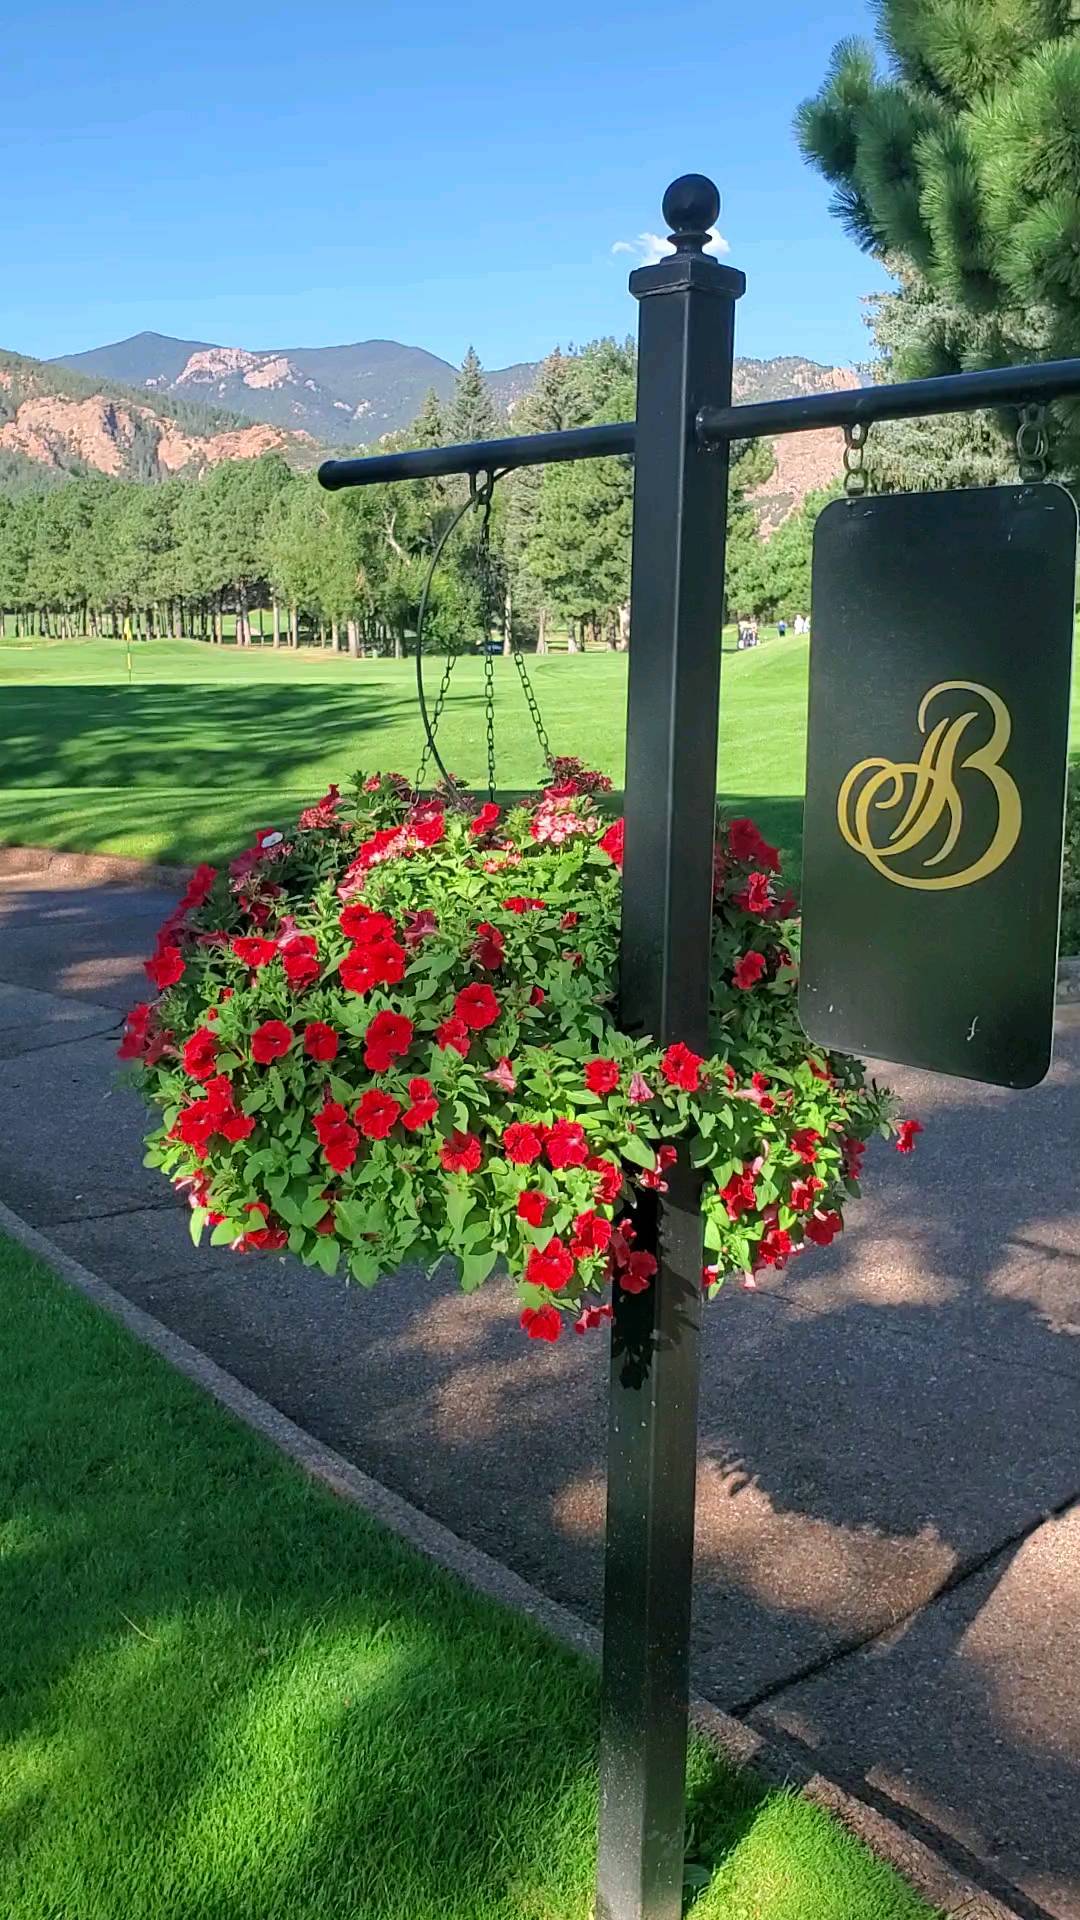 Good morning from the fabulous Broadmoor Resort in Colorado Springs. The Golf course is in superb condition and the views spectacular.#Broadmoor #coloradosprings #golf #golfcontentnetwork #instagolf #instagolfer #visitcolorado #cloudcamp #colorado #travel #golftrips #sqairz #tifosioptics #cosmadelduca